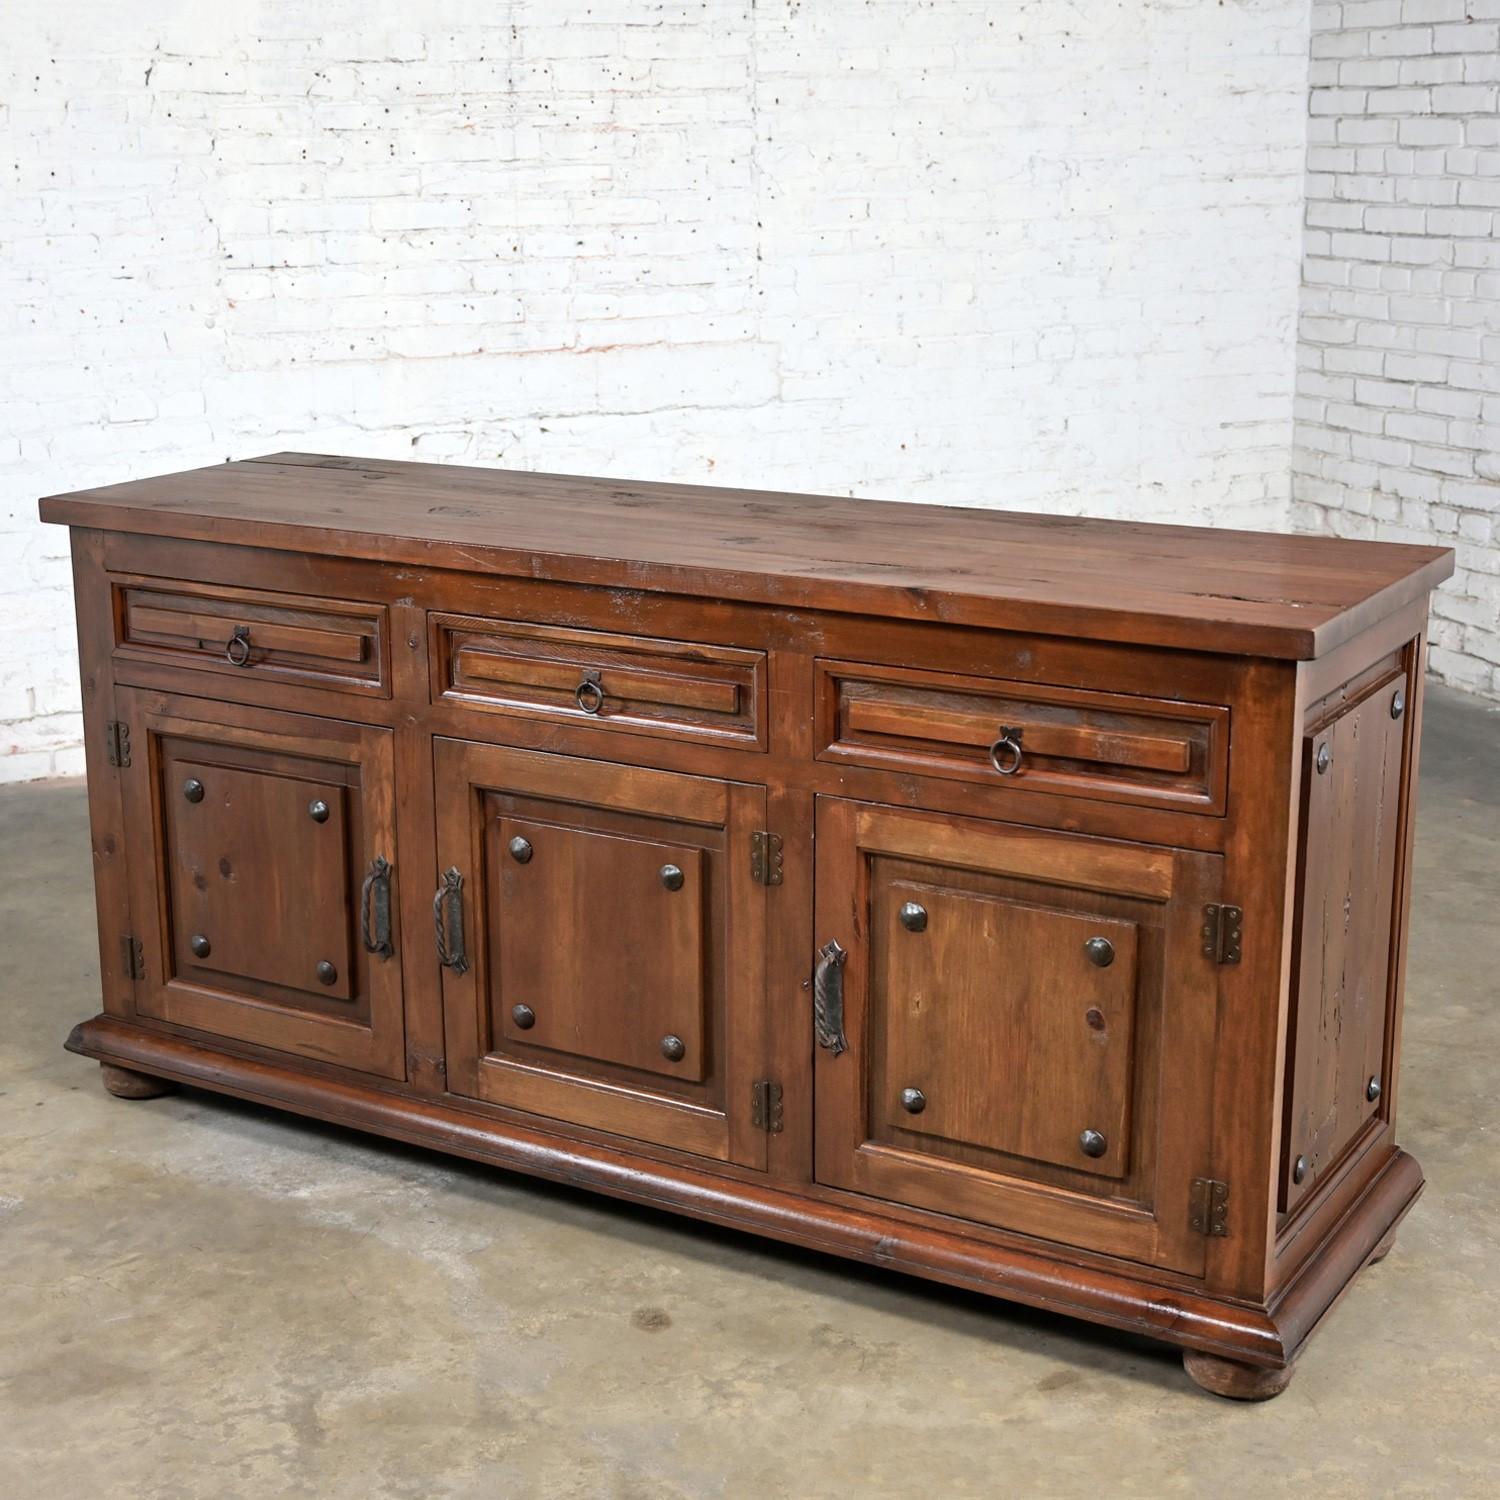 Spanish Colonial Spanish Revival Rustic Solid Pine Sideboard Style of Artes De Mexico Intern'tnl  For Sale